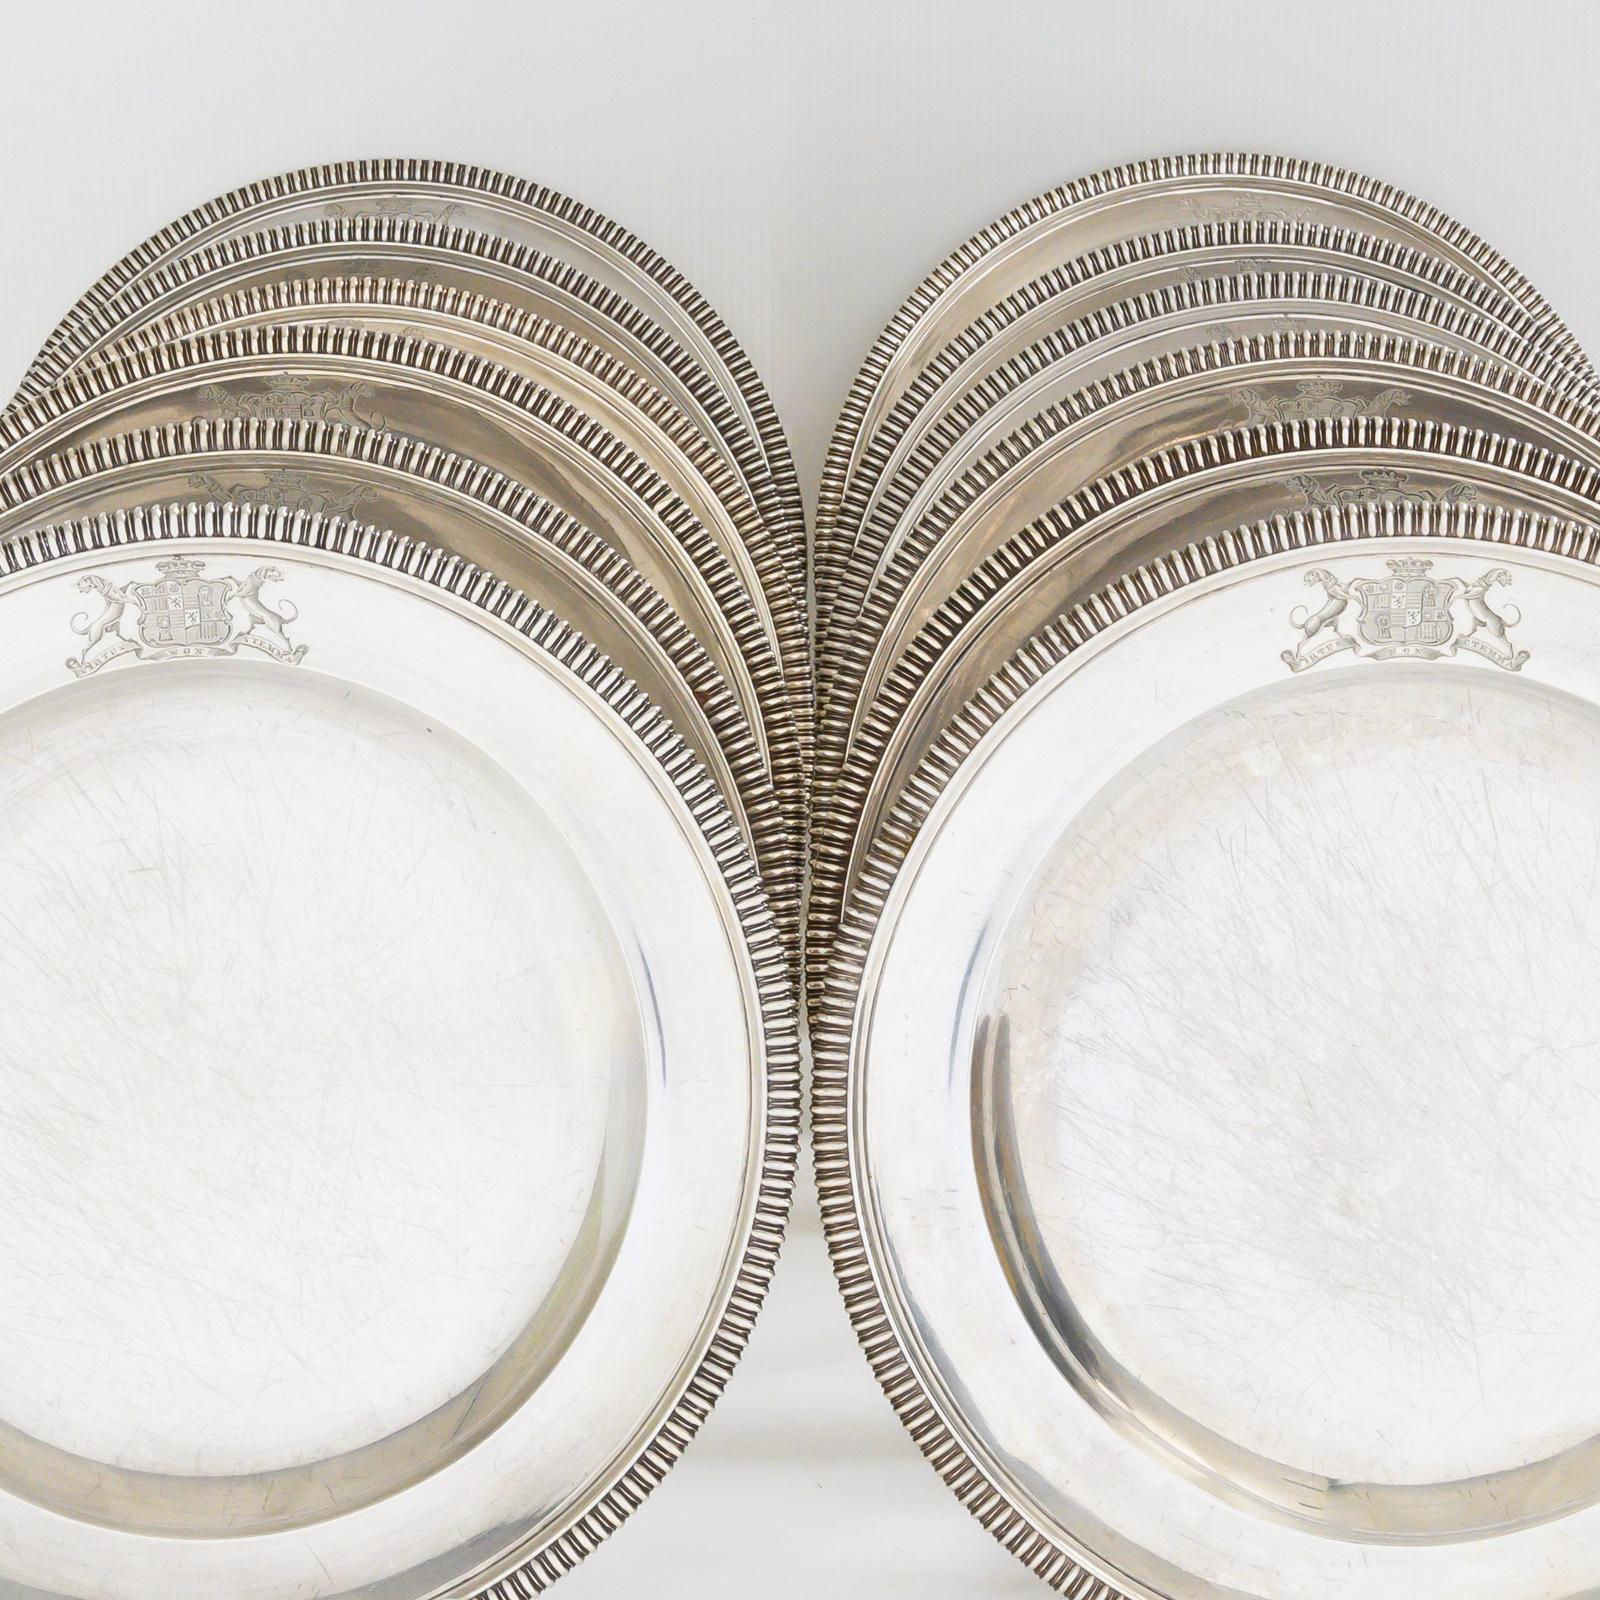 British Set of 12 Silver Dinner Plates by Paul Storr